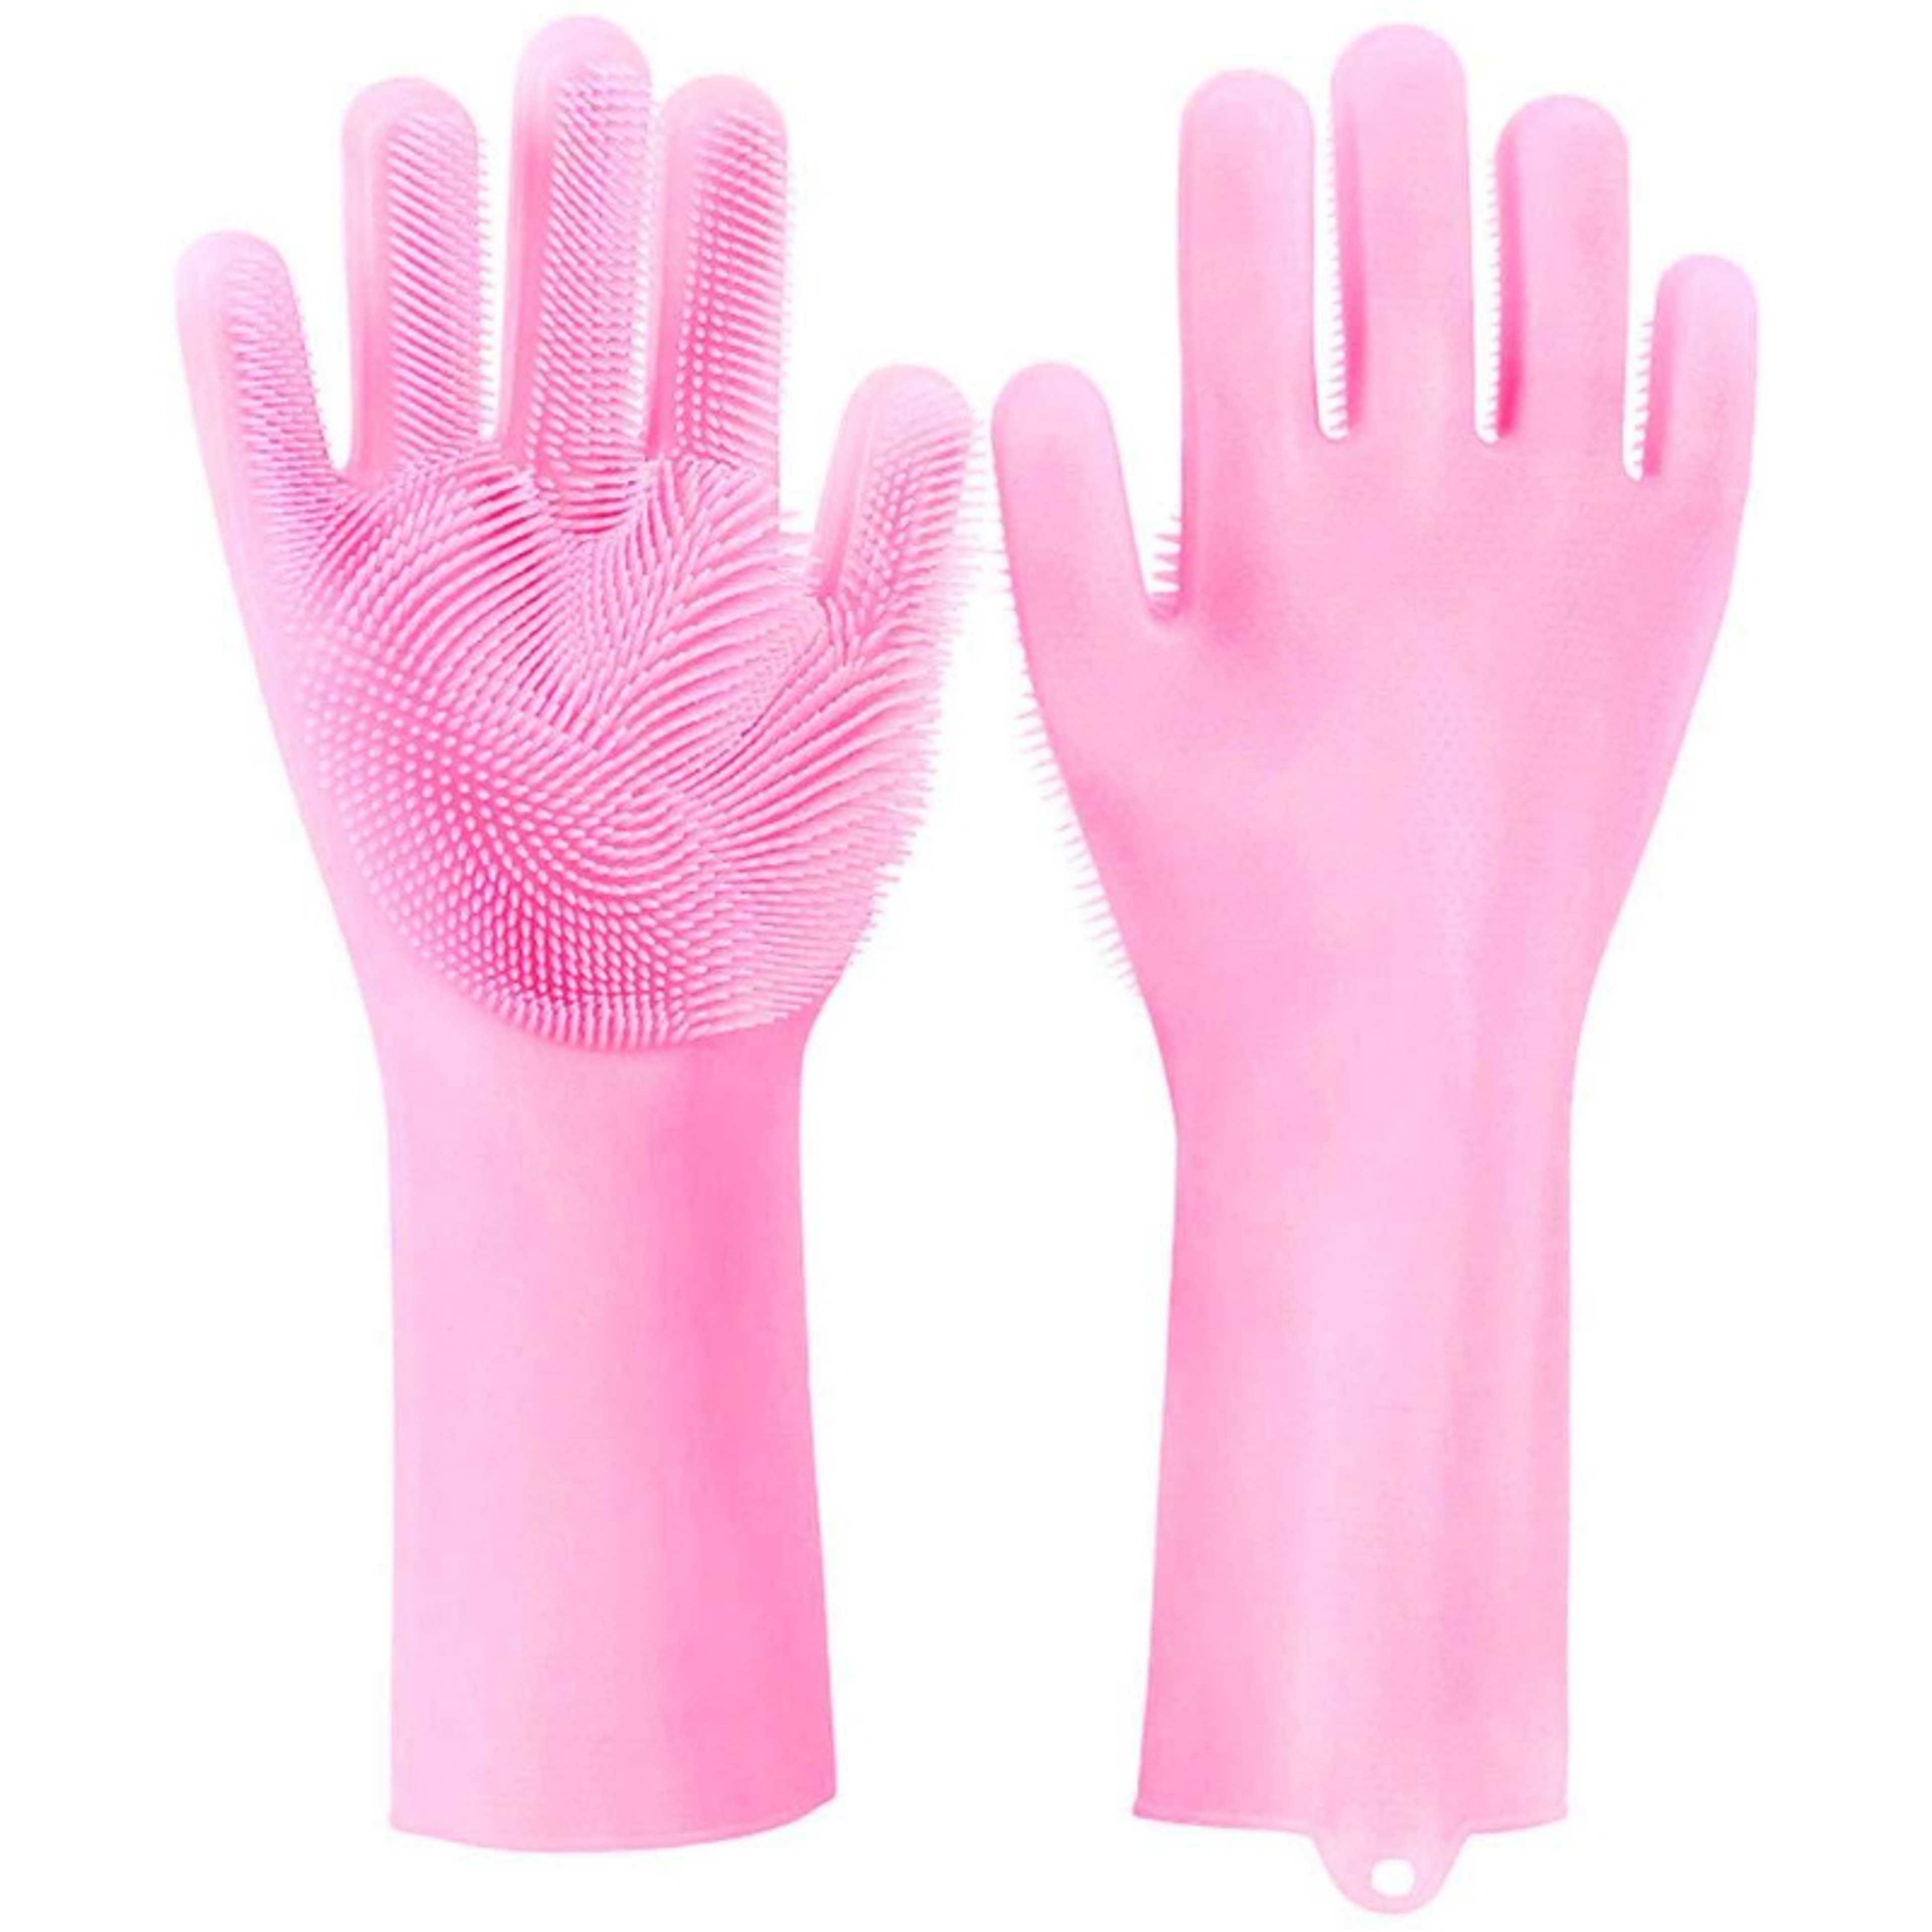 Magic Silicone Dishwashing Scrubbing Clean Gloves Reusable Sponge Gloves with Scrubber for Washing Dishes Kitchen Bathroom Household Car and Pet Care 1 pair